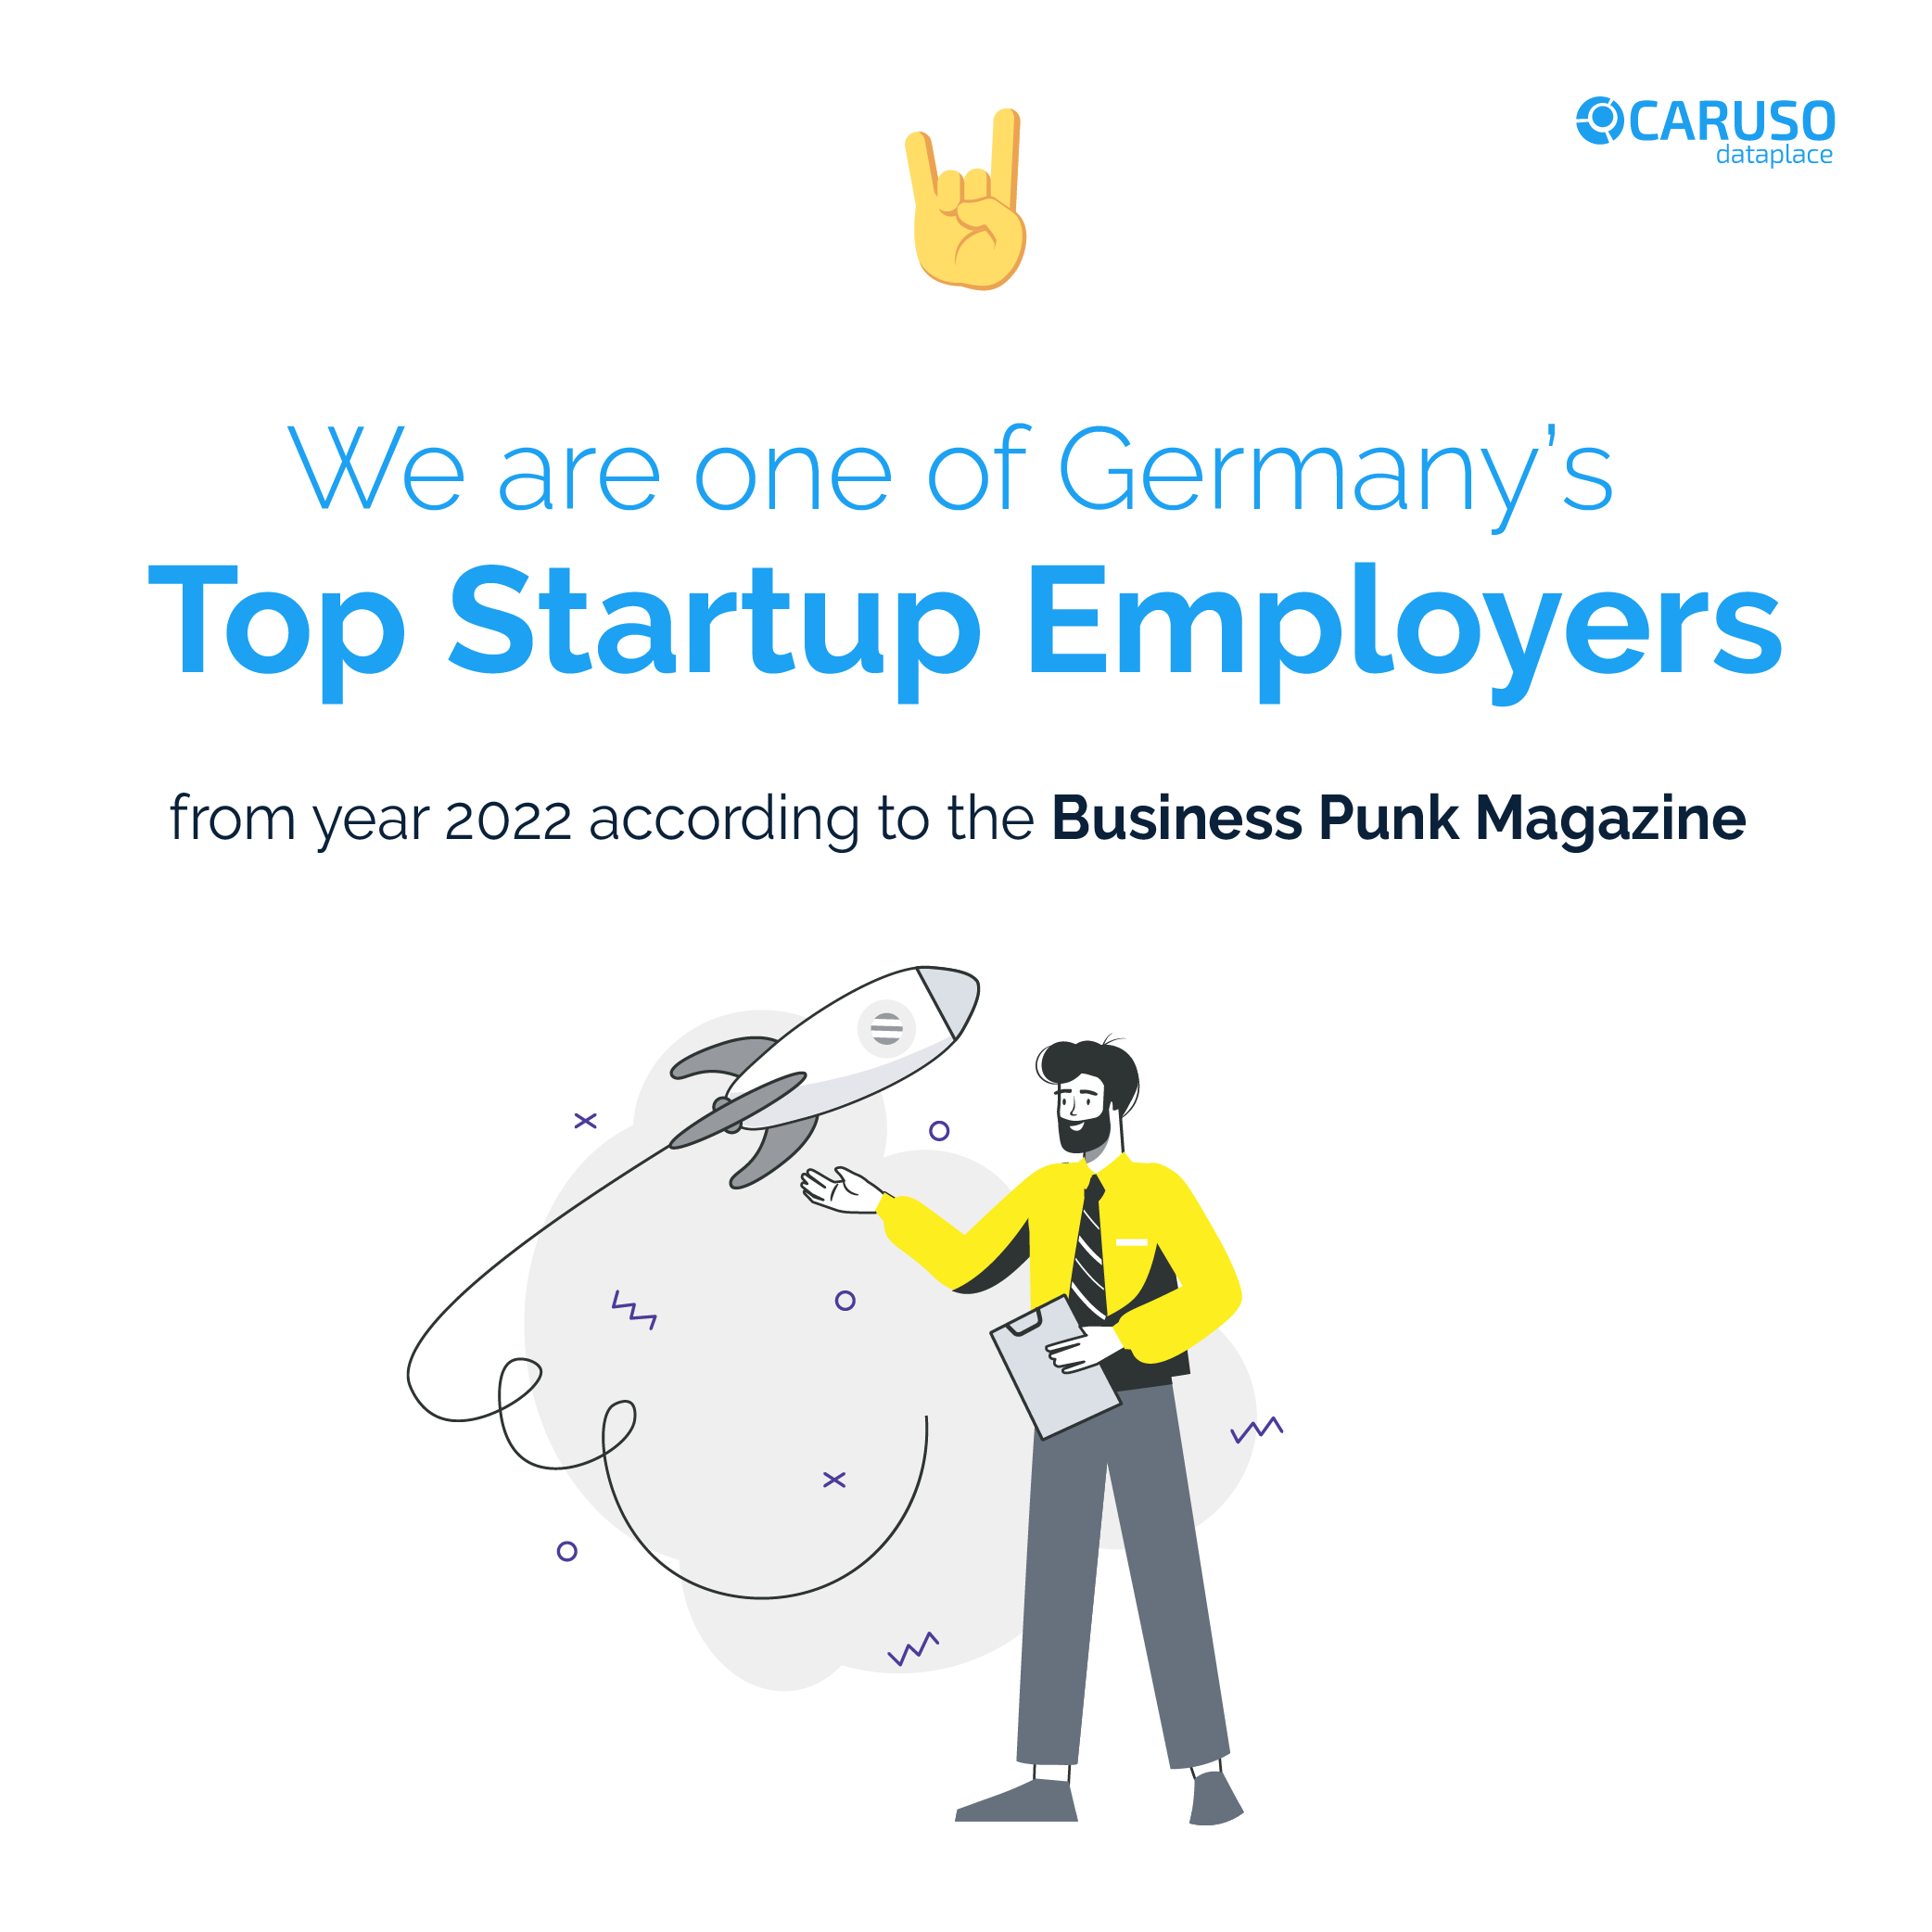 Germany's Top Startup Employer